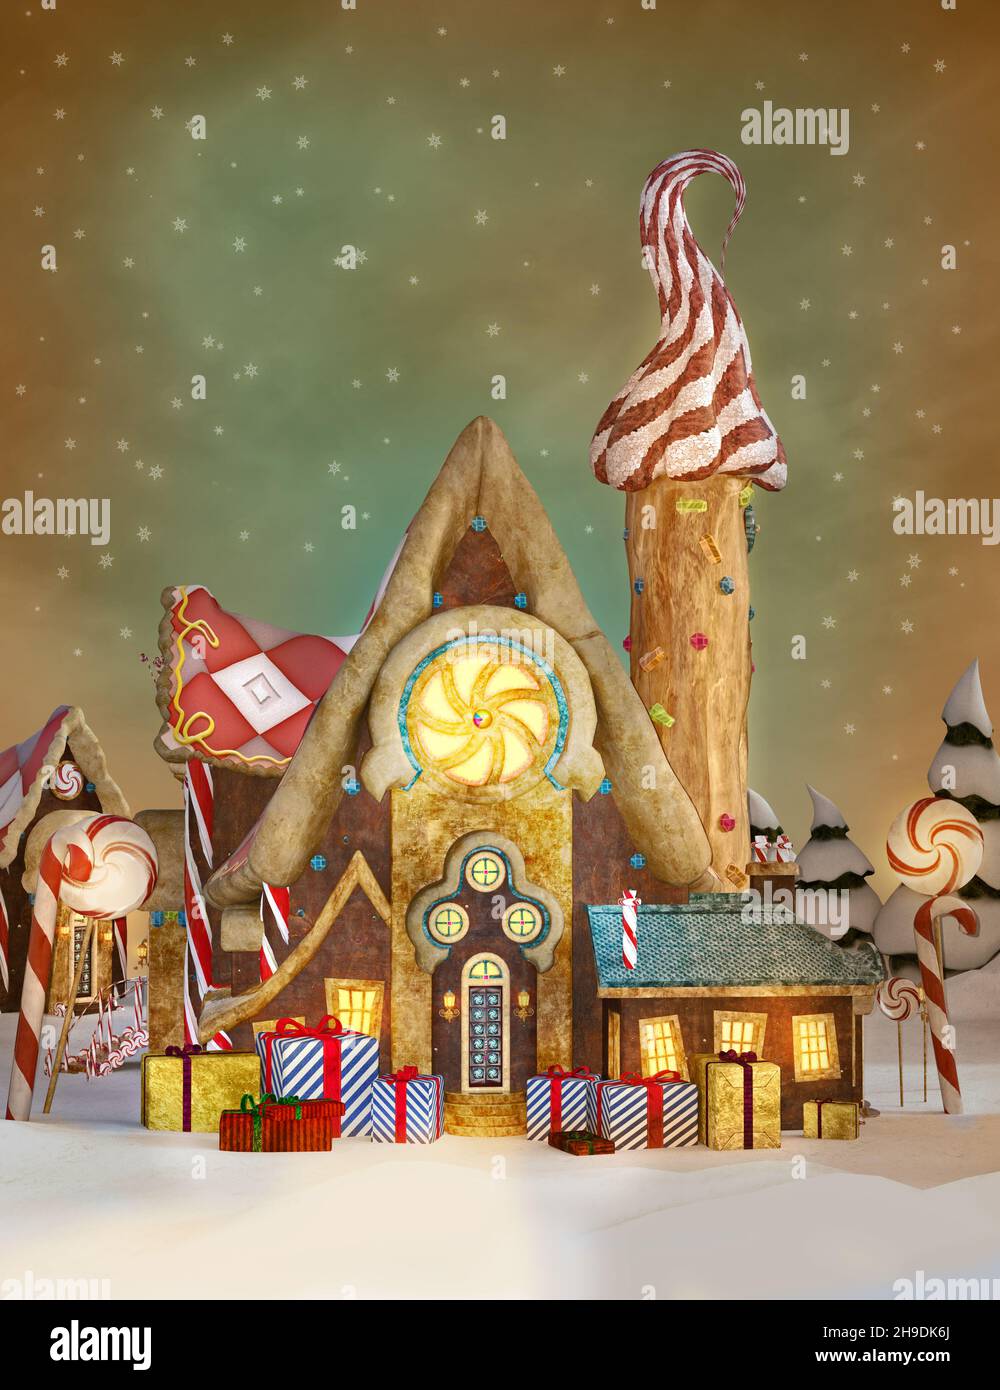 Snowfall over the gingerbread town at Christmas time Stock Photo